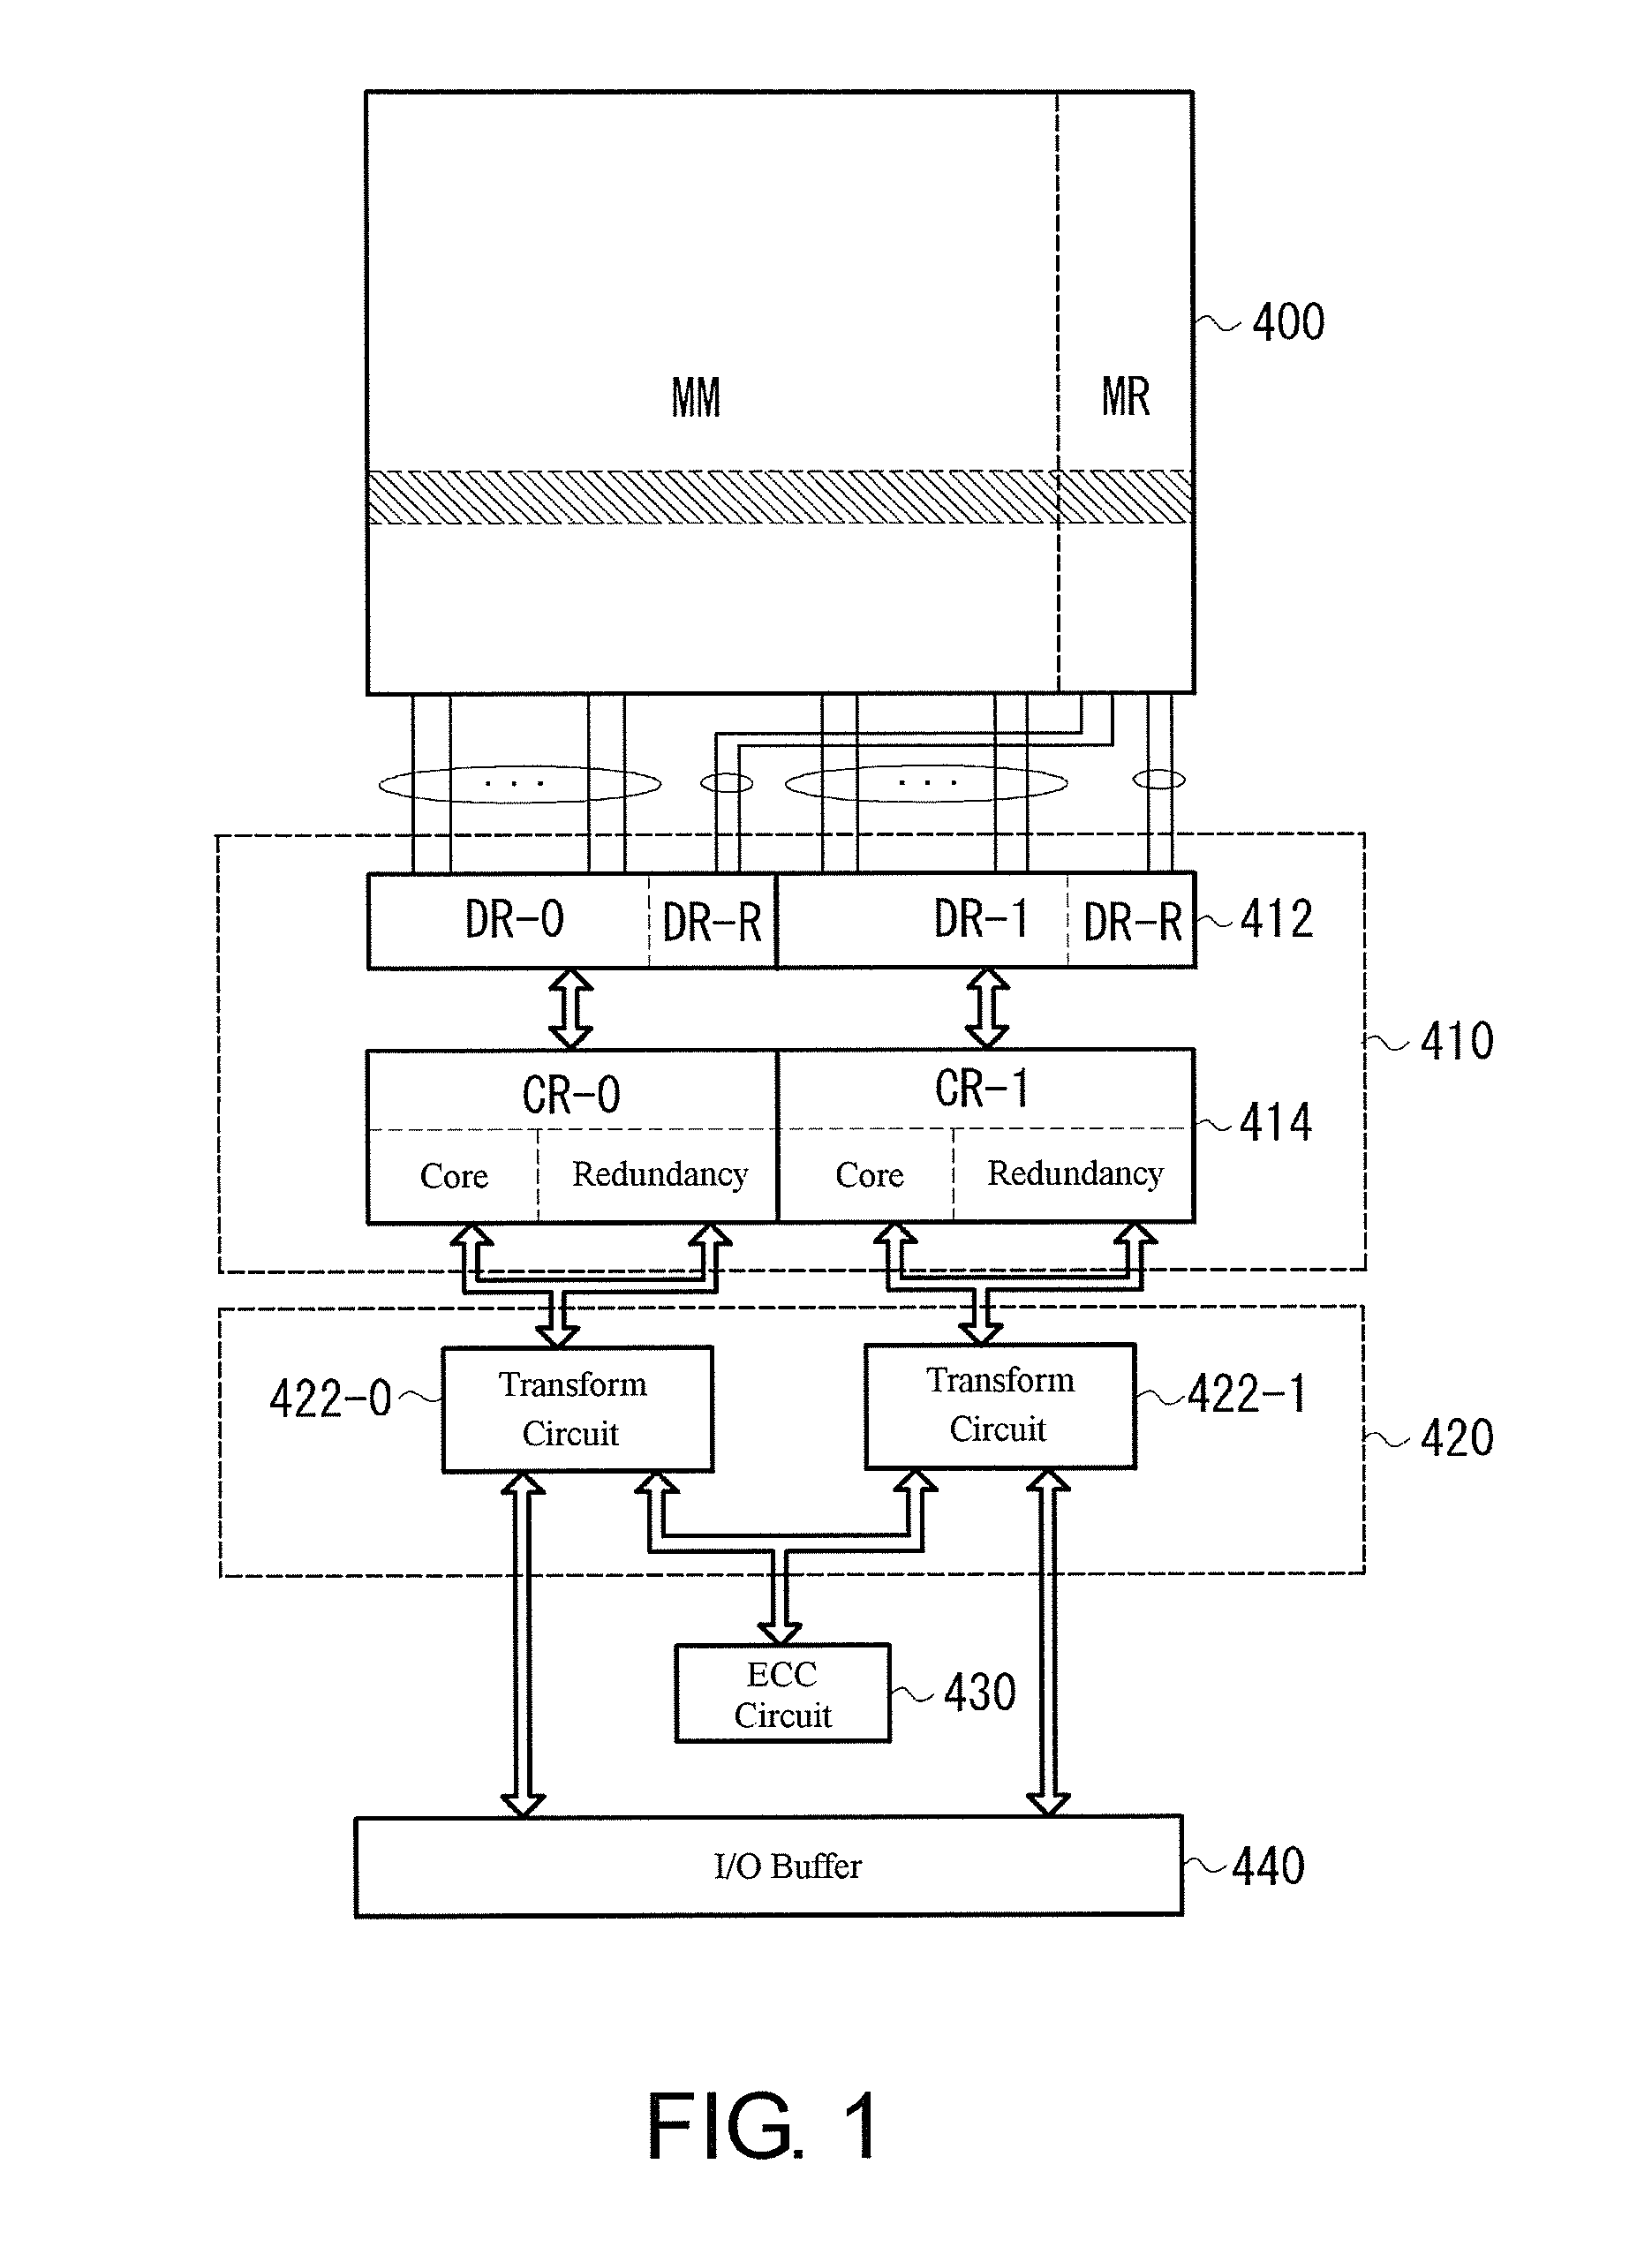 Semiconductor storing device and redundancy method thereof